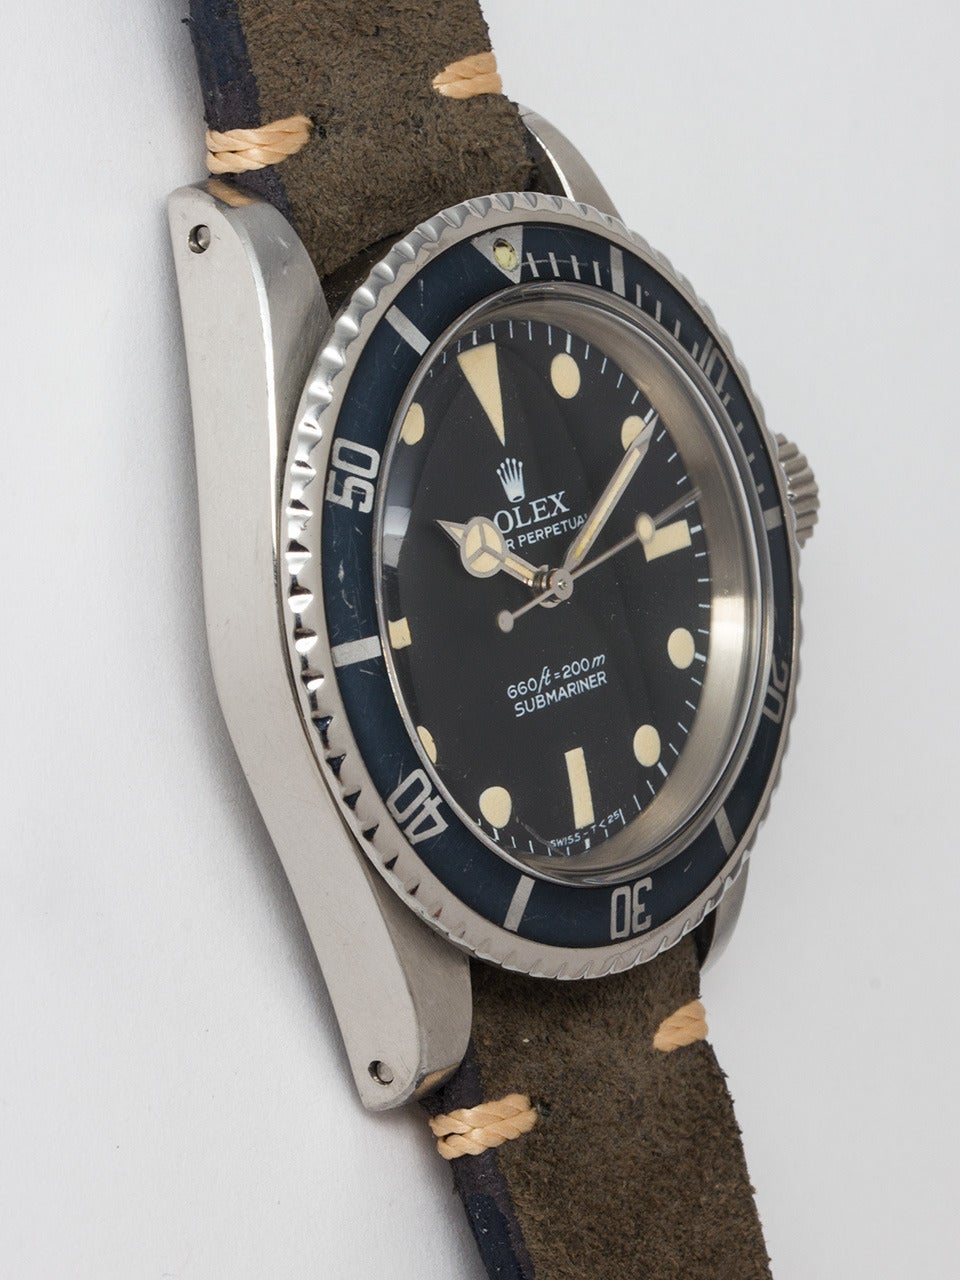 Rolex Stainless Steel Submariner Wristwatch ref 5513 serial# 5.1 million circa 1977. 39.5mm diameter case with very desirable faded original elapsed time bezel. Matte black dial with matching patina'd luminous indexes and hands. Powered by calibre